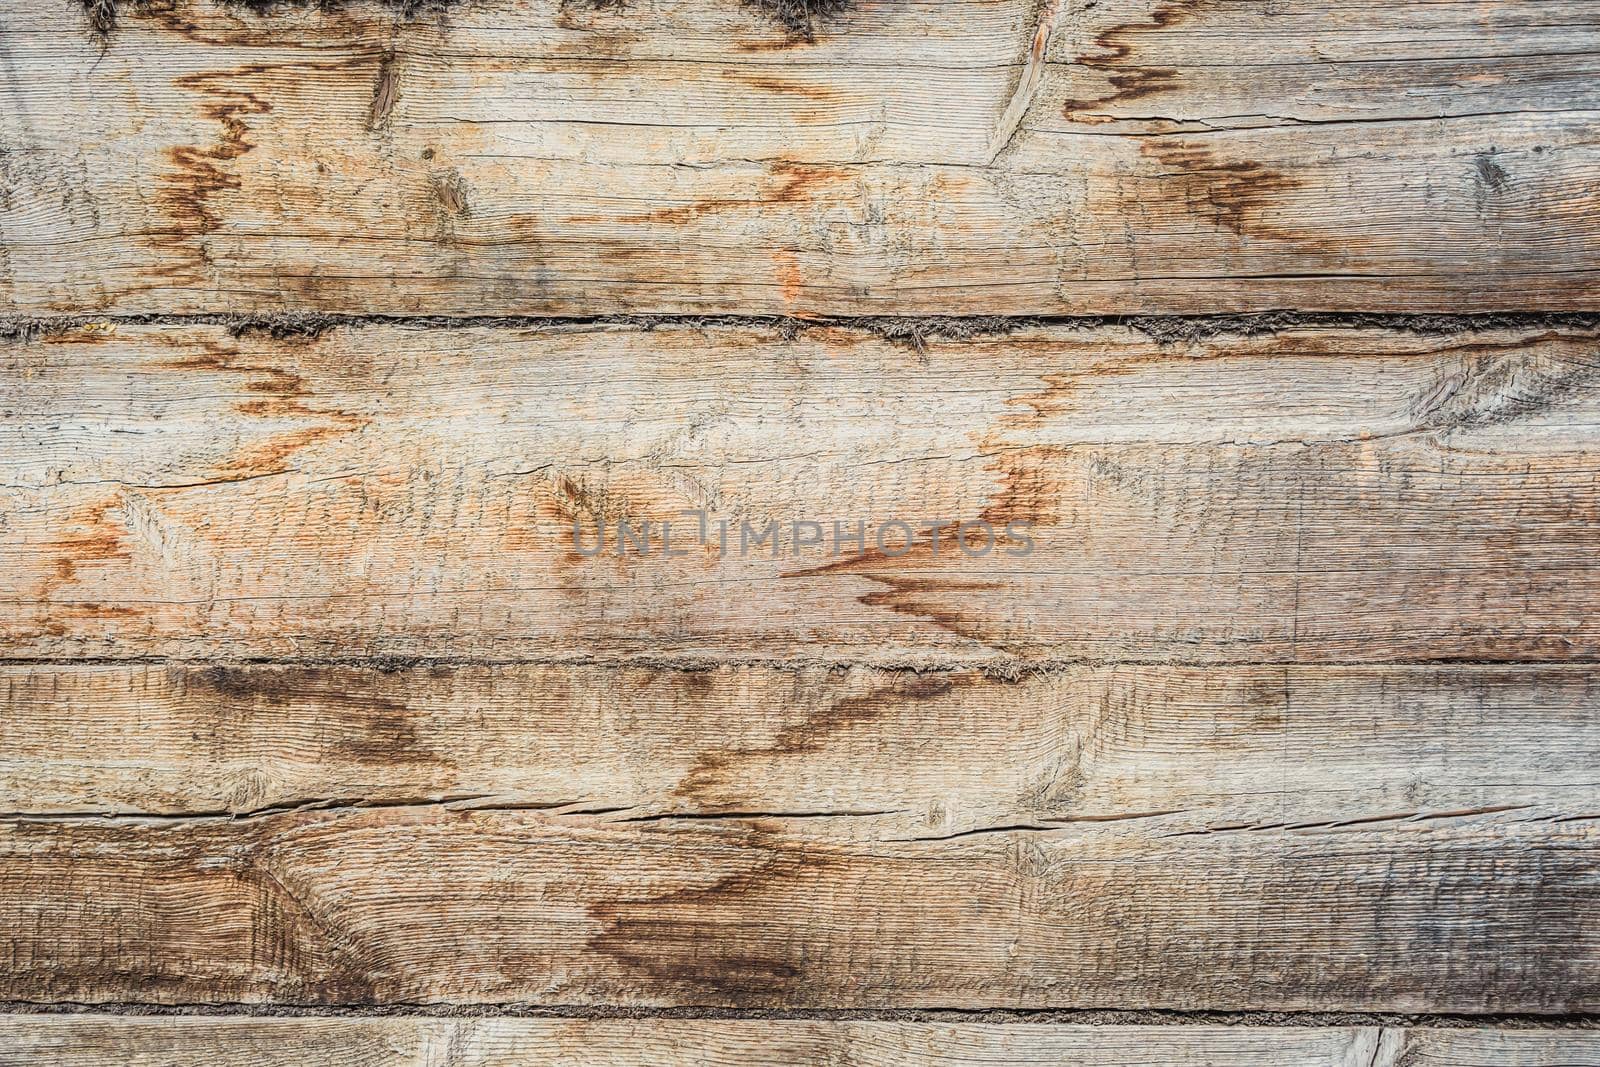 Texture of old wooden planks as a background by Skaron